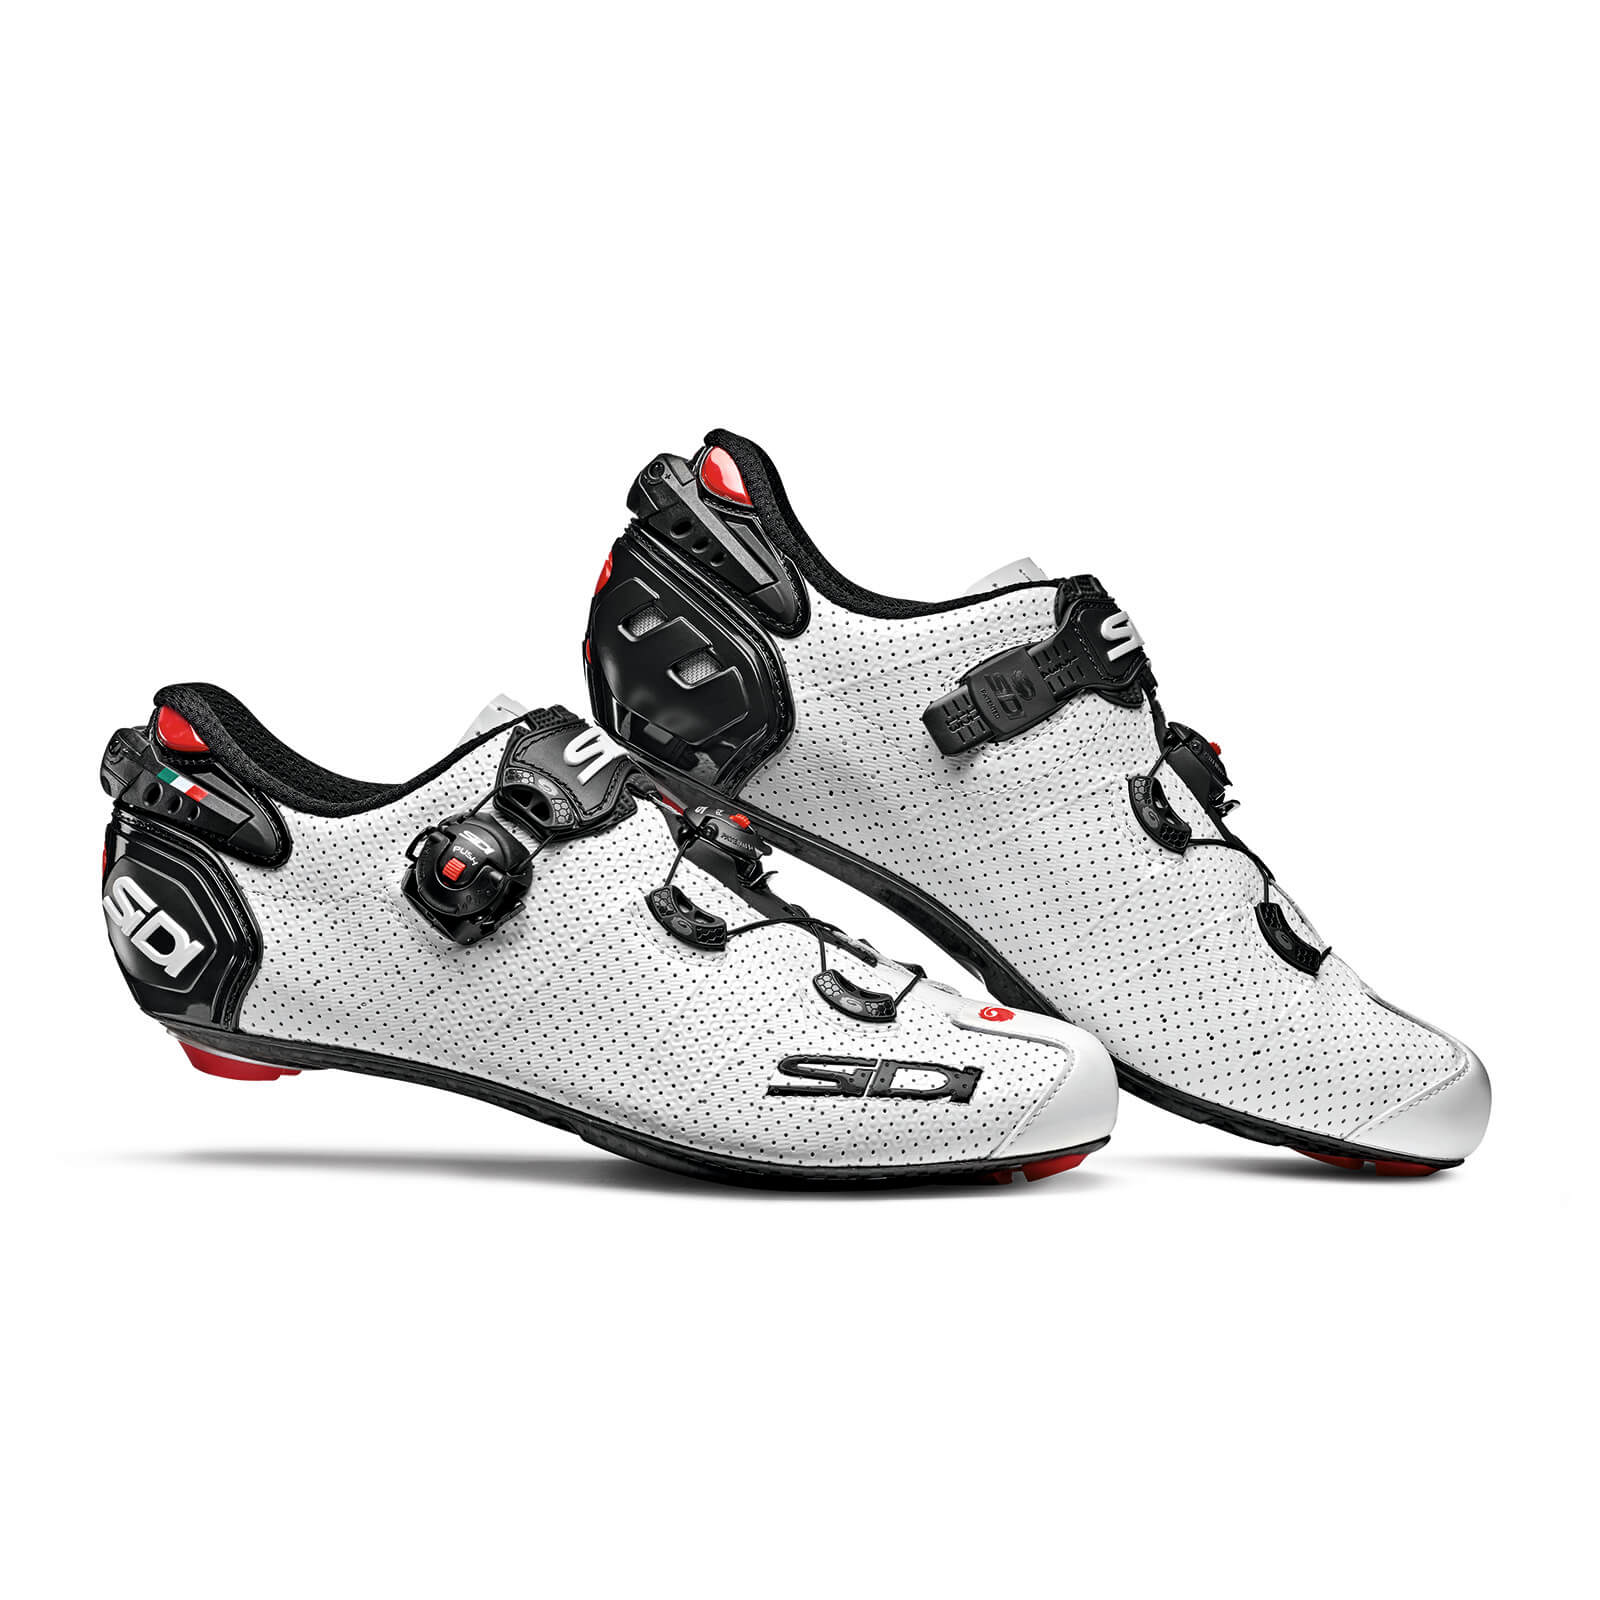 Sidi Wire 2 Carbon Air Road Shoes 